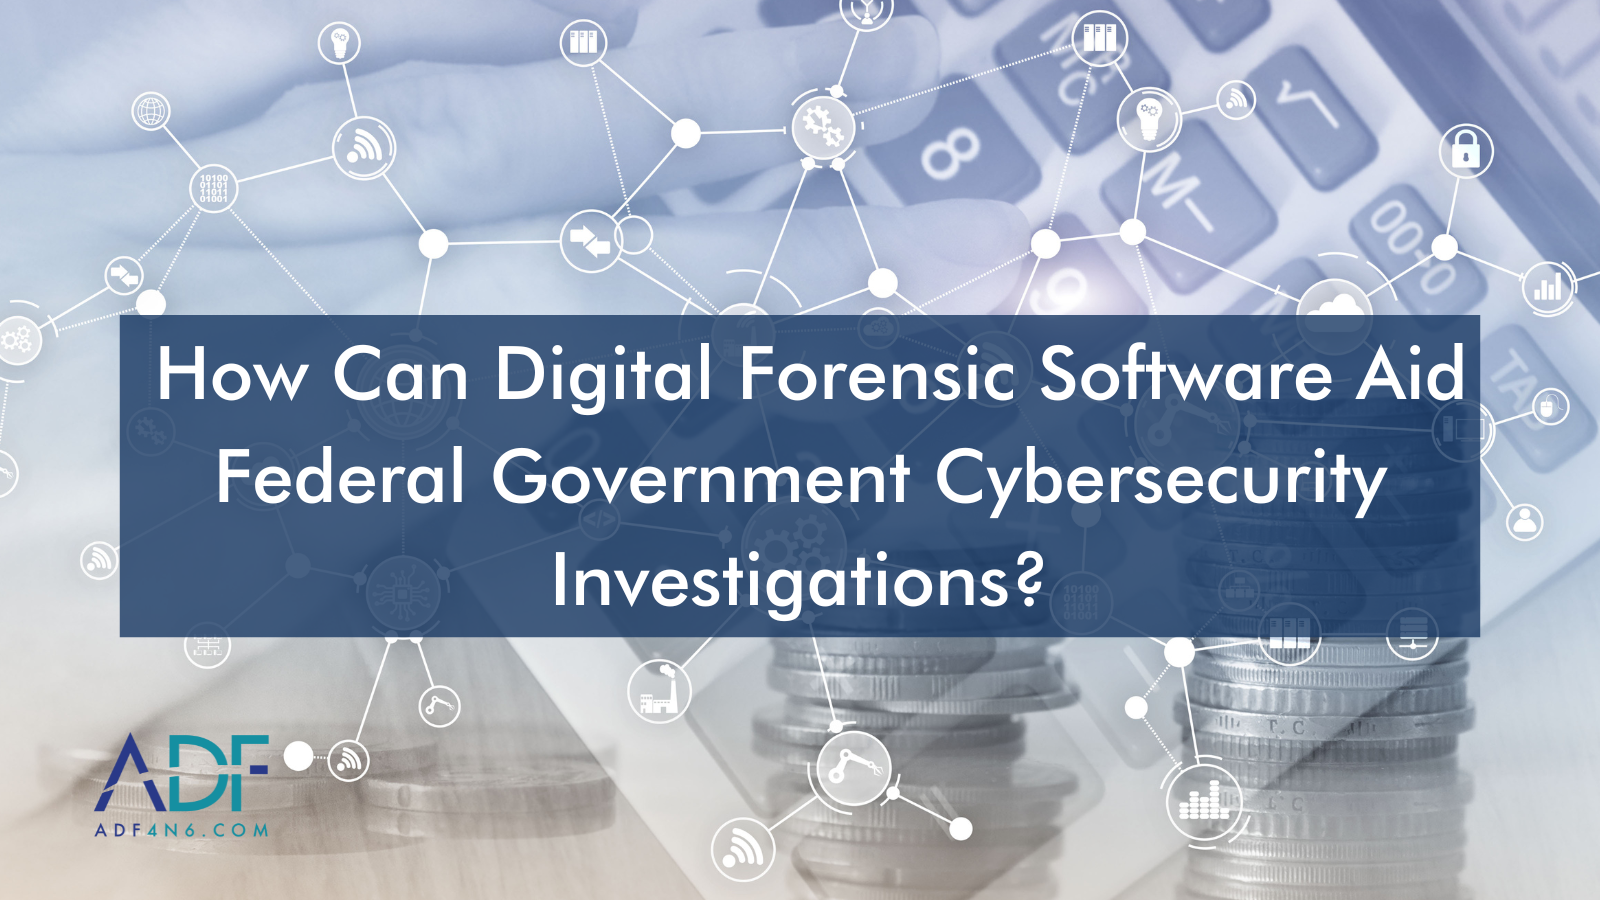 How Can Digital Forensic Software Aid Federal Government Cybersecurity Investigations?